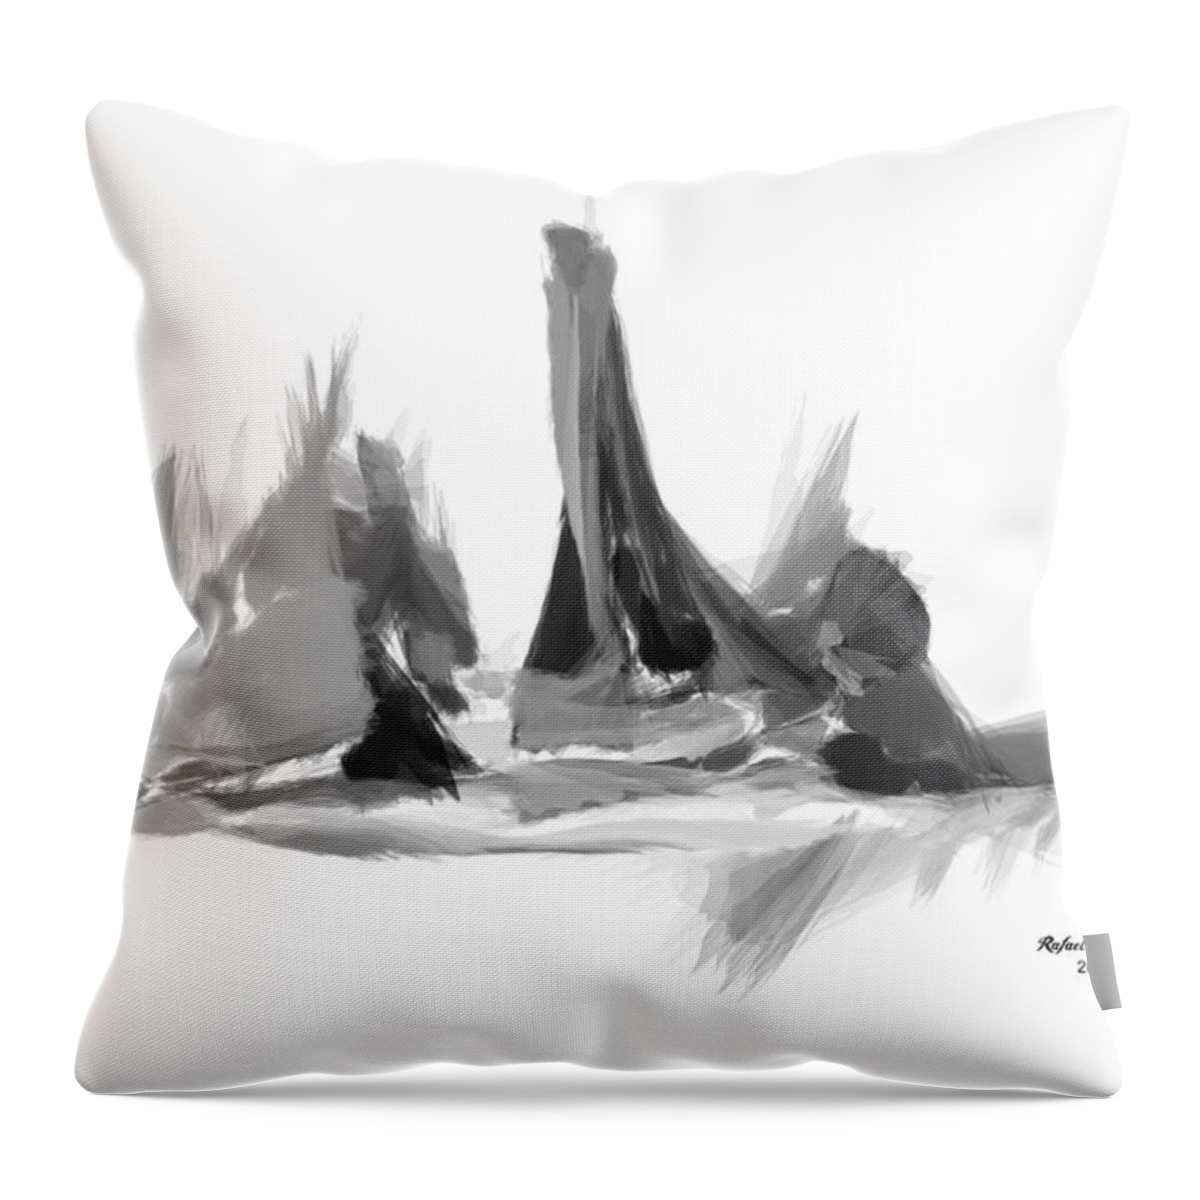 Harbour Throw Pillow featuring the digital art Harbour by Rafael Salazar